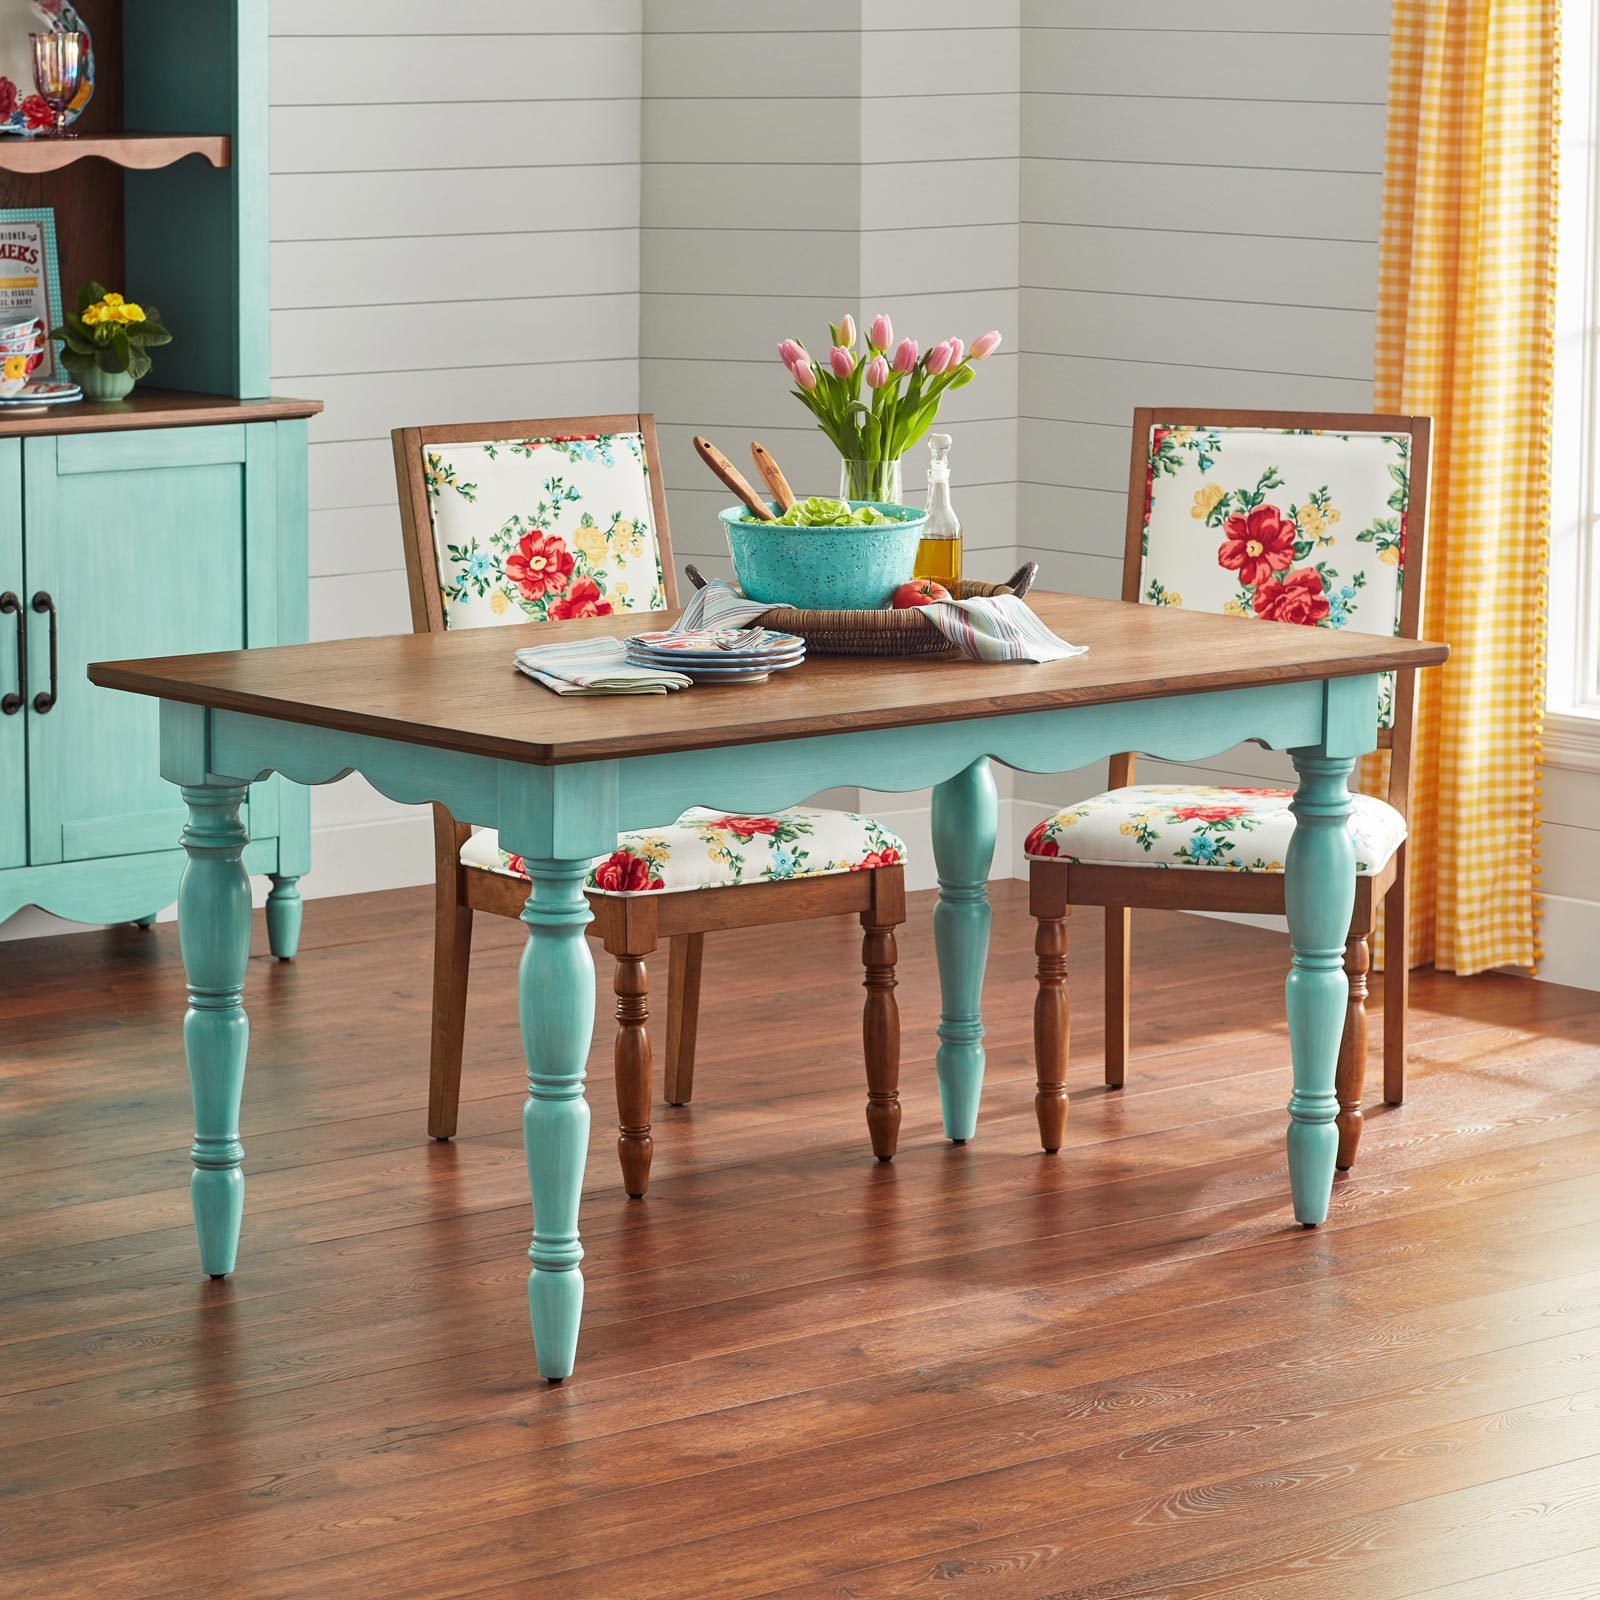 Pioneer Woman Furniture  Walmart Restocks Ready-to-Assemble Pieces